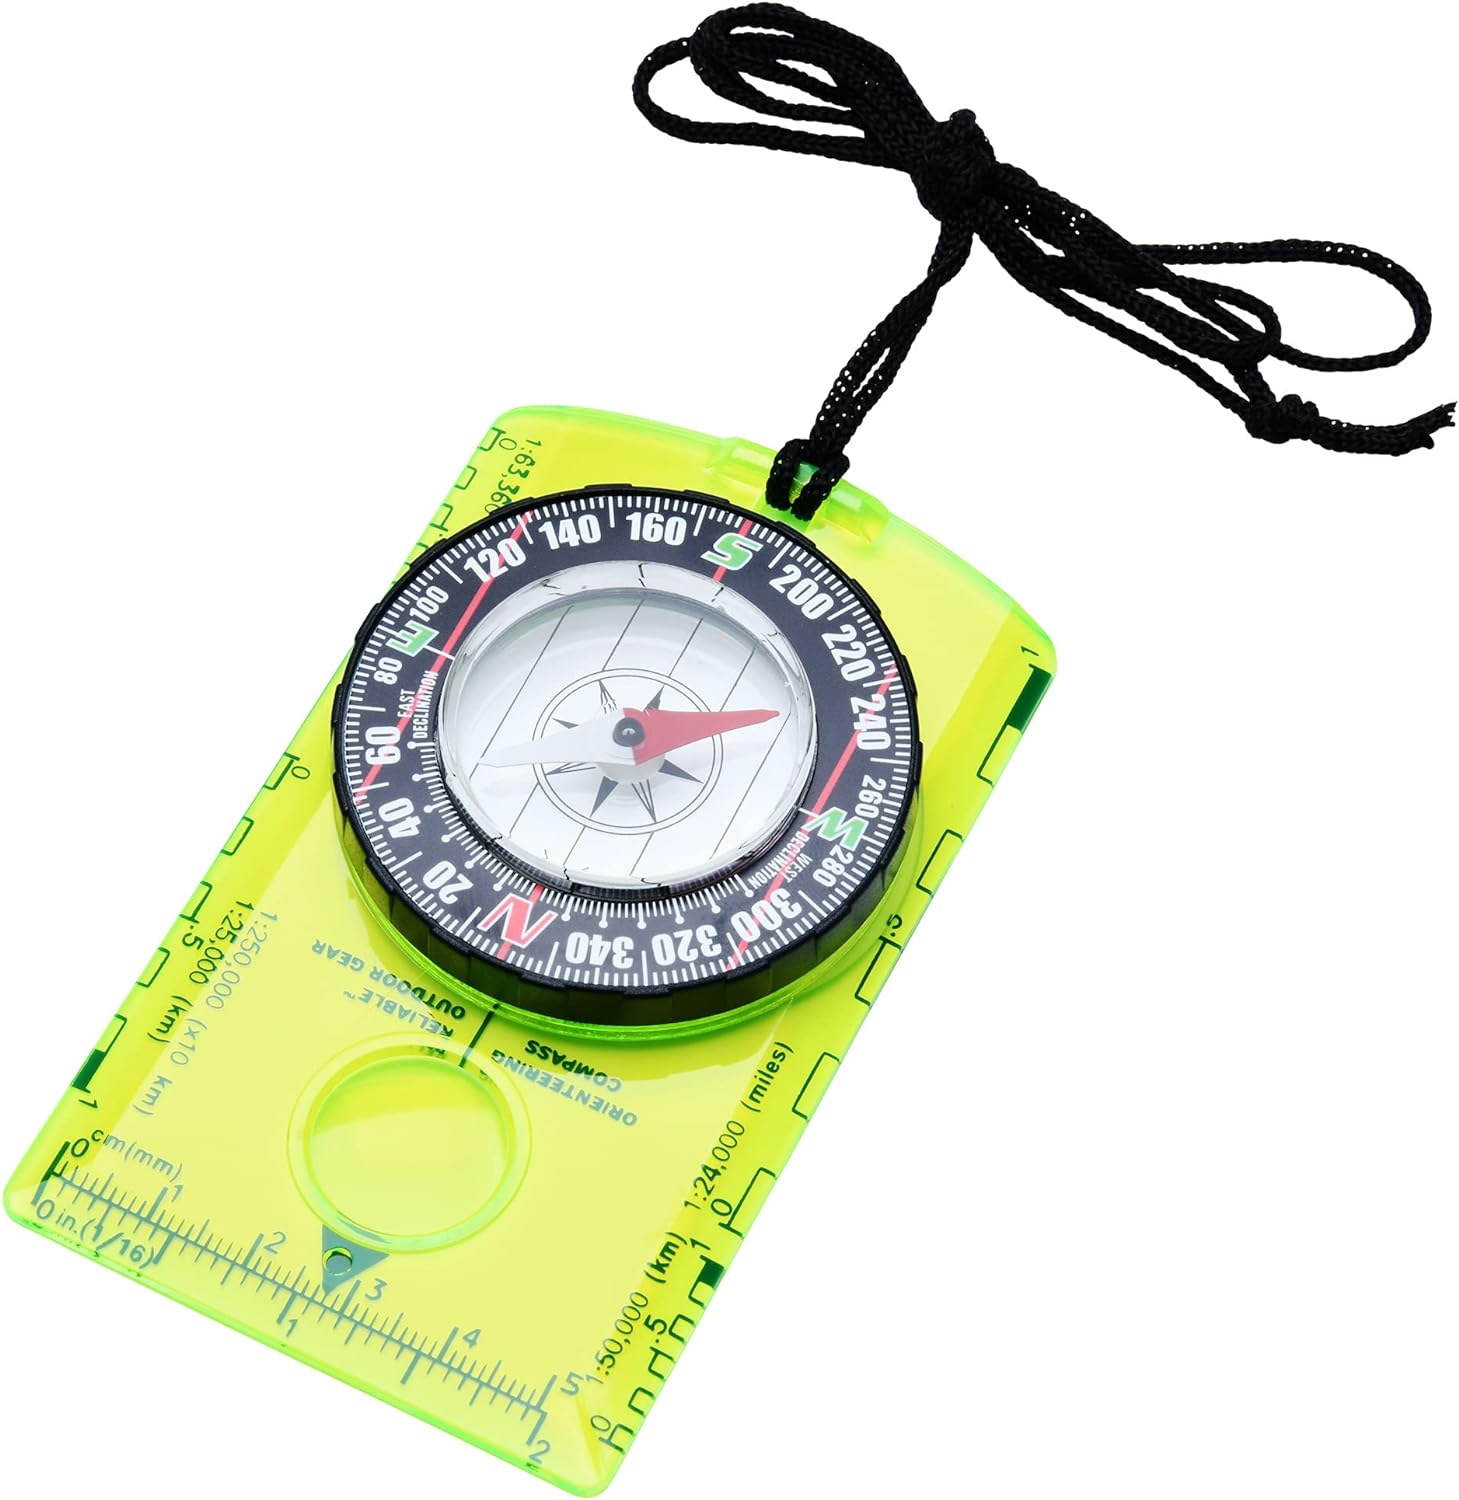 Professional Boy Scout Compass - Liquid Filled, Rotating Bezel, Magnetic Heading - for Navigation, Orienteering and Survival